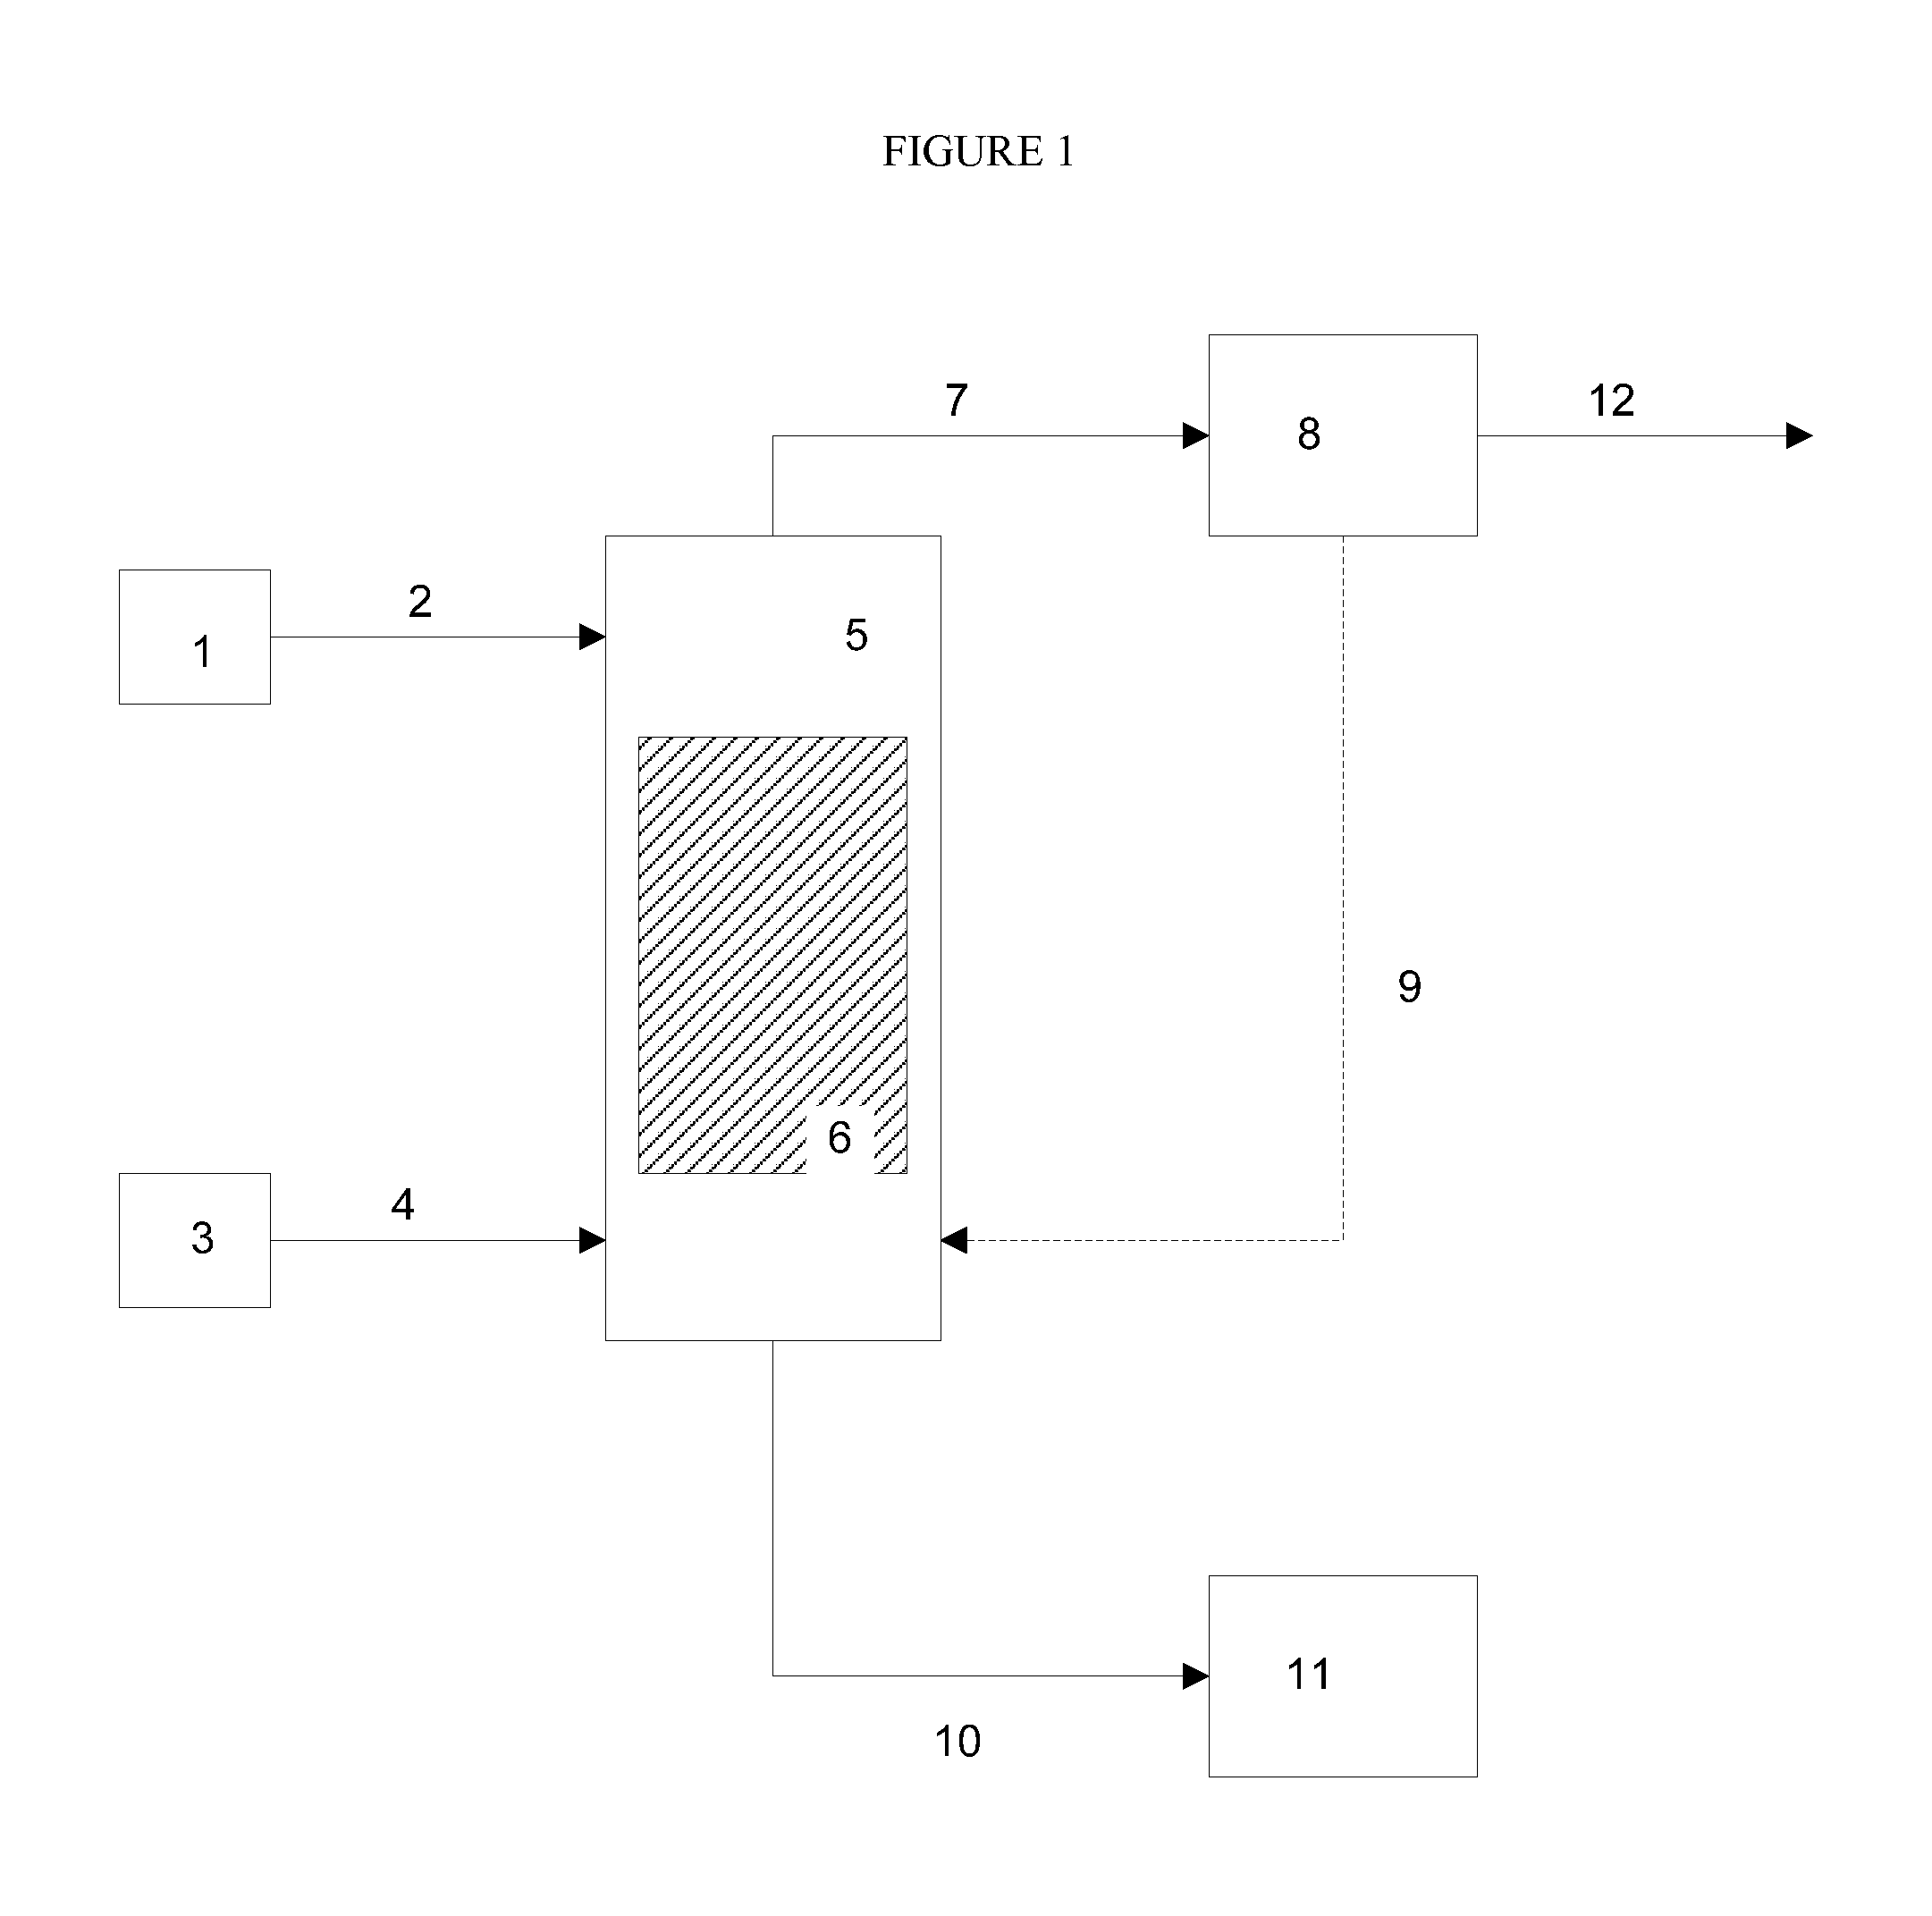 Method for Obtaining Biodiesel, Alternative Fuels and Renewable Fuels Tax Credits and Treatment